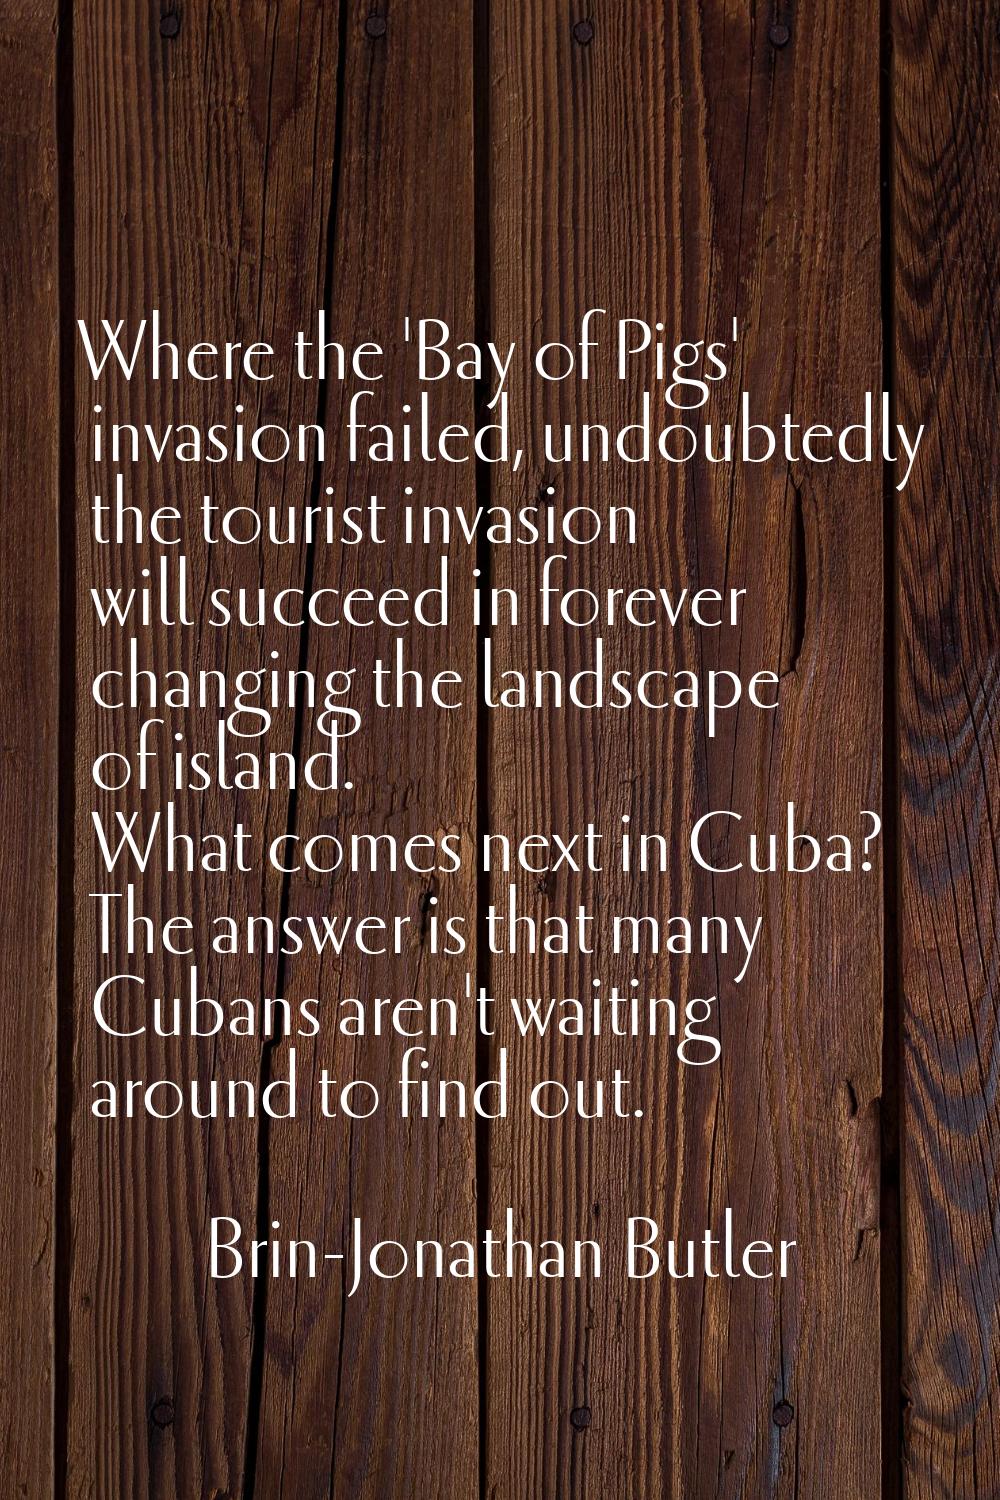 Where the 'Bay of Pigs' invasion failed, undoubtedly the tourist invasion will succeed in forever c